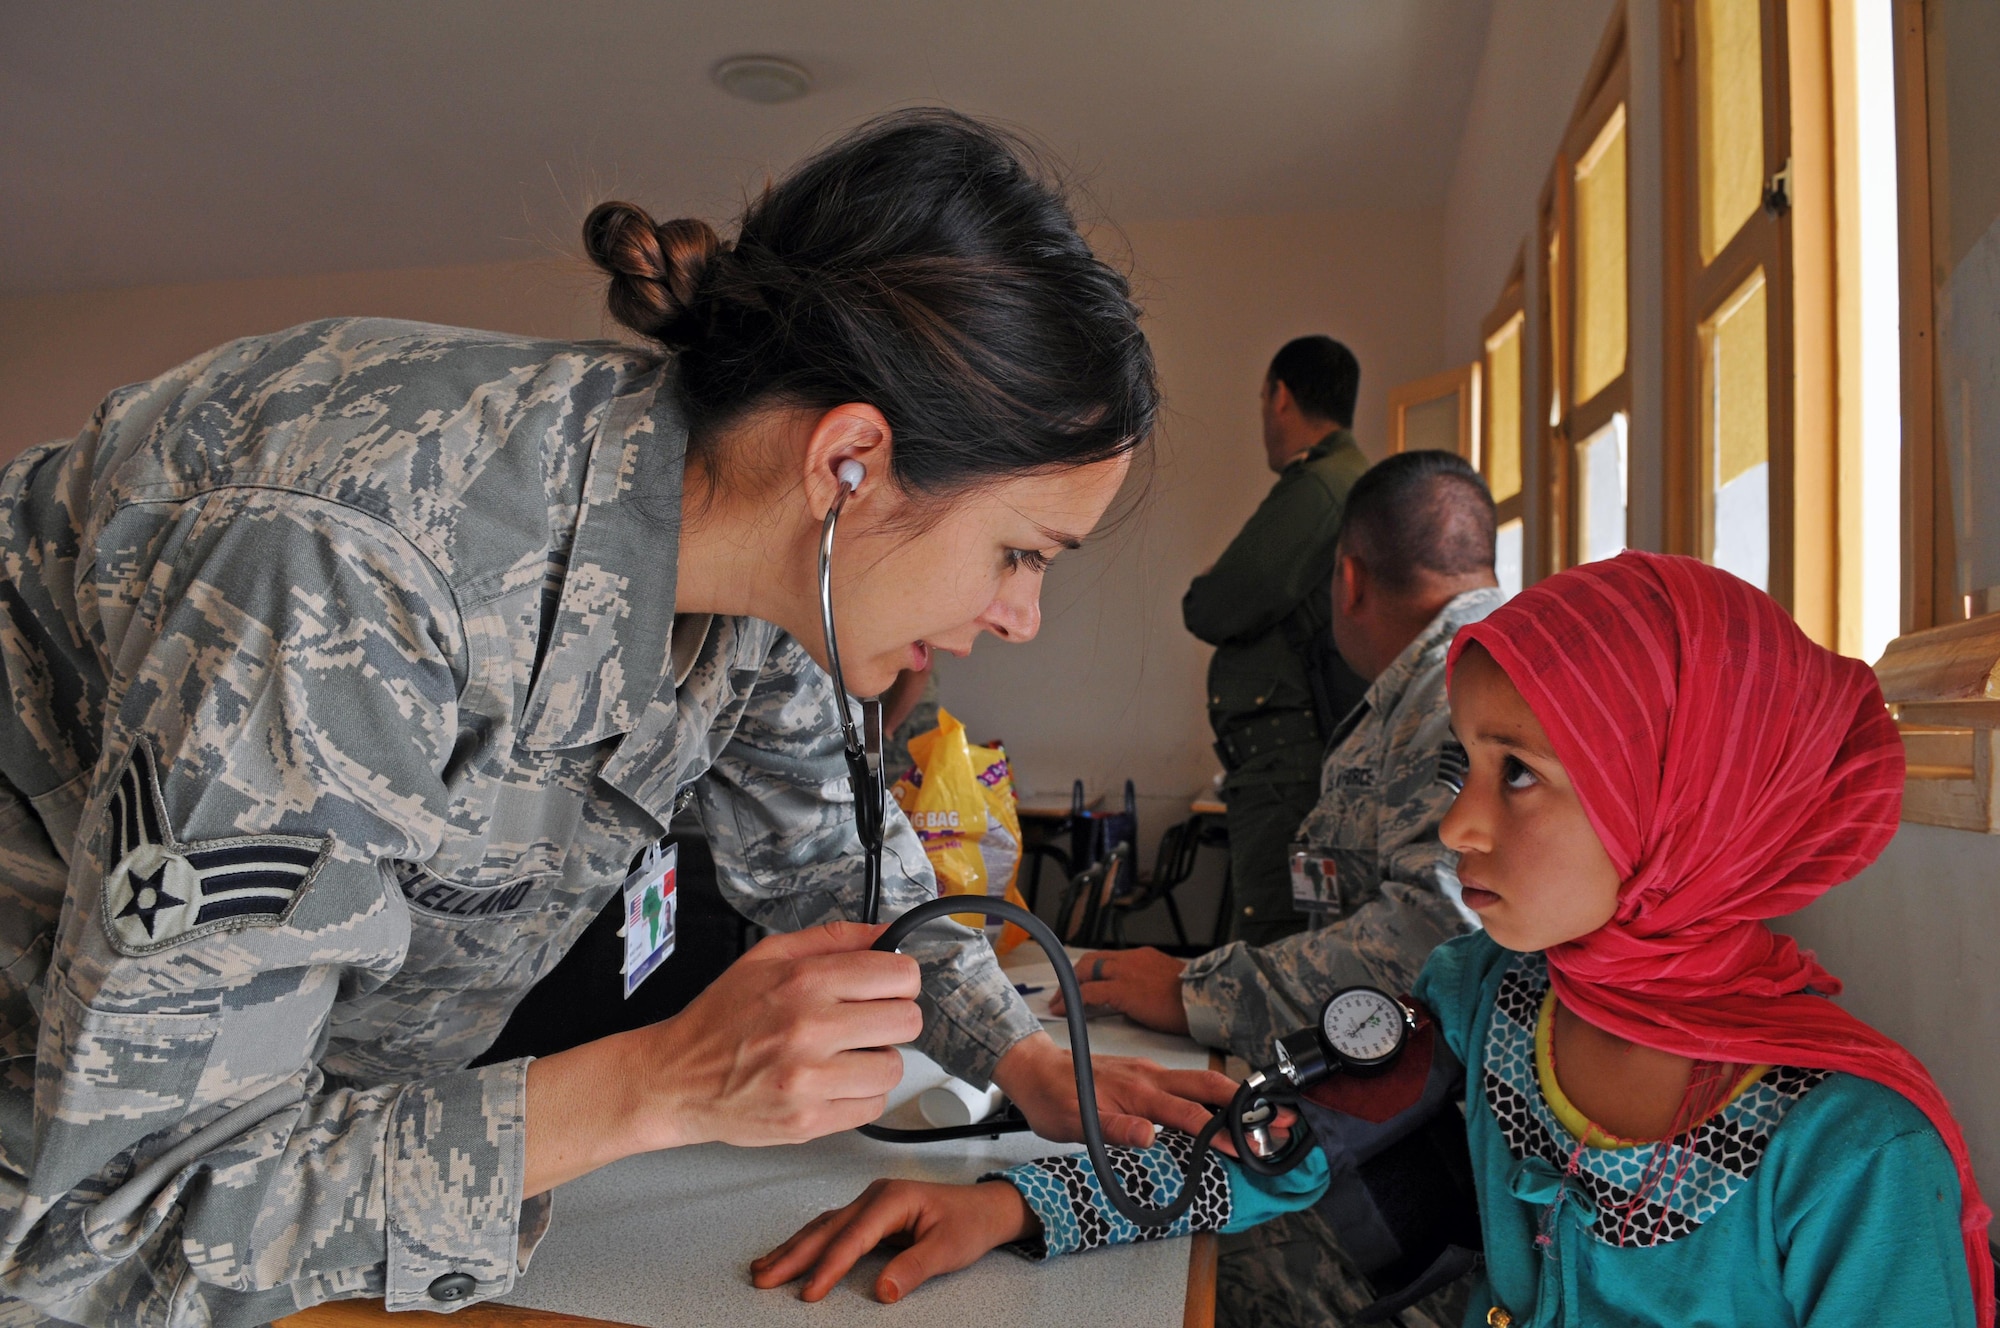 Senior Airman Holly Mclelland, a medical technician with the 151st Medical Group takes the blood pressure of a patient at the clinic in Tagmout, Morocco on April 23, 2017. (U.S. Air National Guard photo by Tech. Sgt. Annie Edwards)